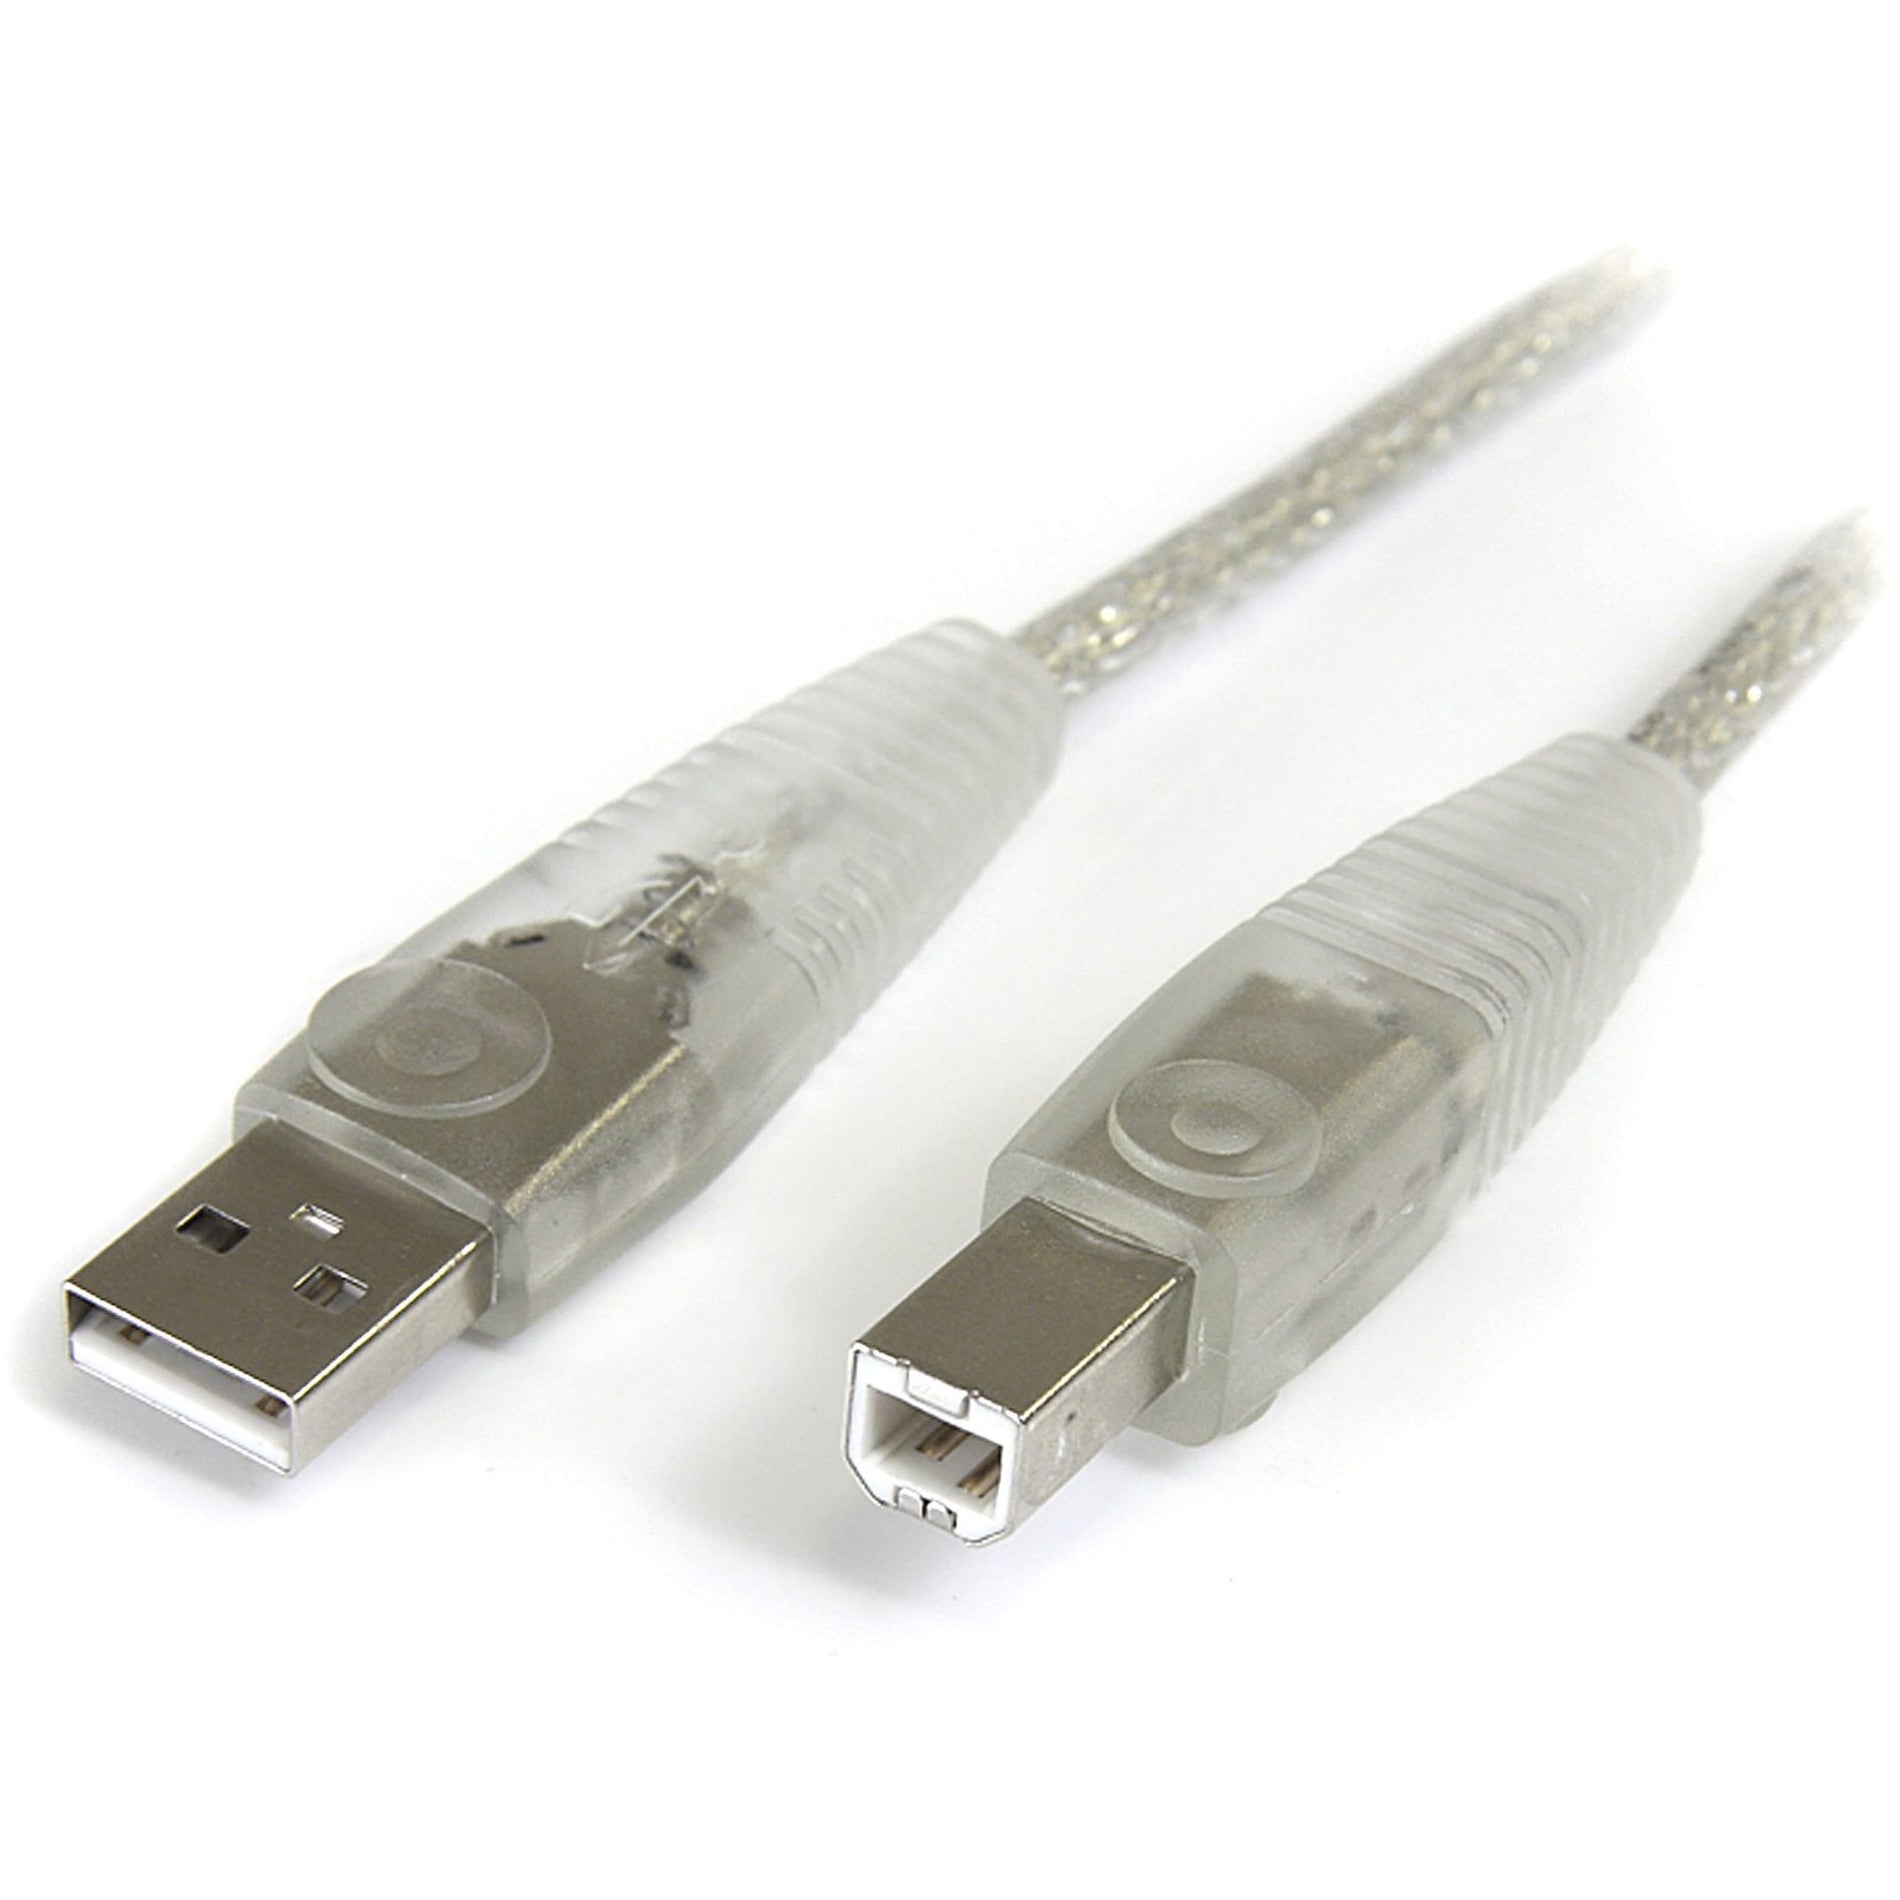 StarTech.com USB2HAB10T 10 ft Transparent USB 2.0 Cable - A to B, High-Speed Data Transfer, Lifetime Warranty